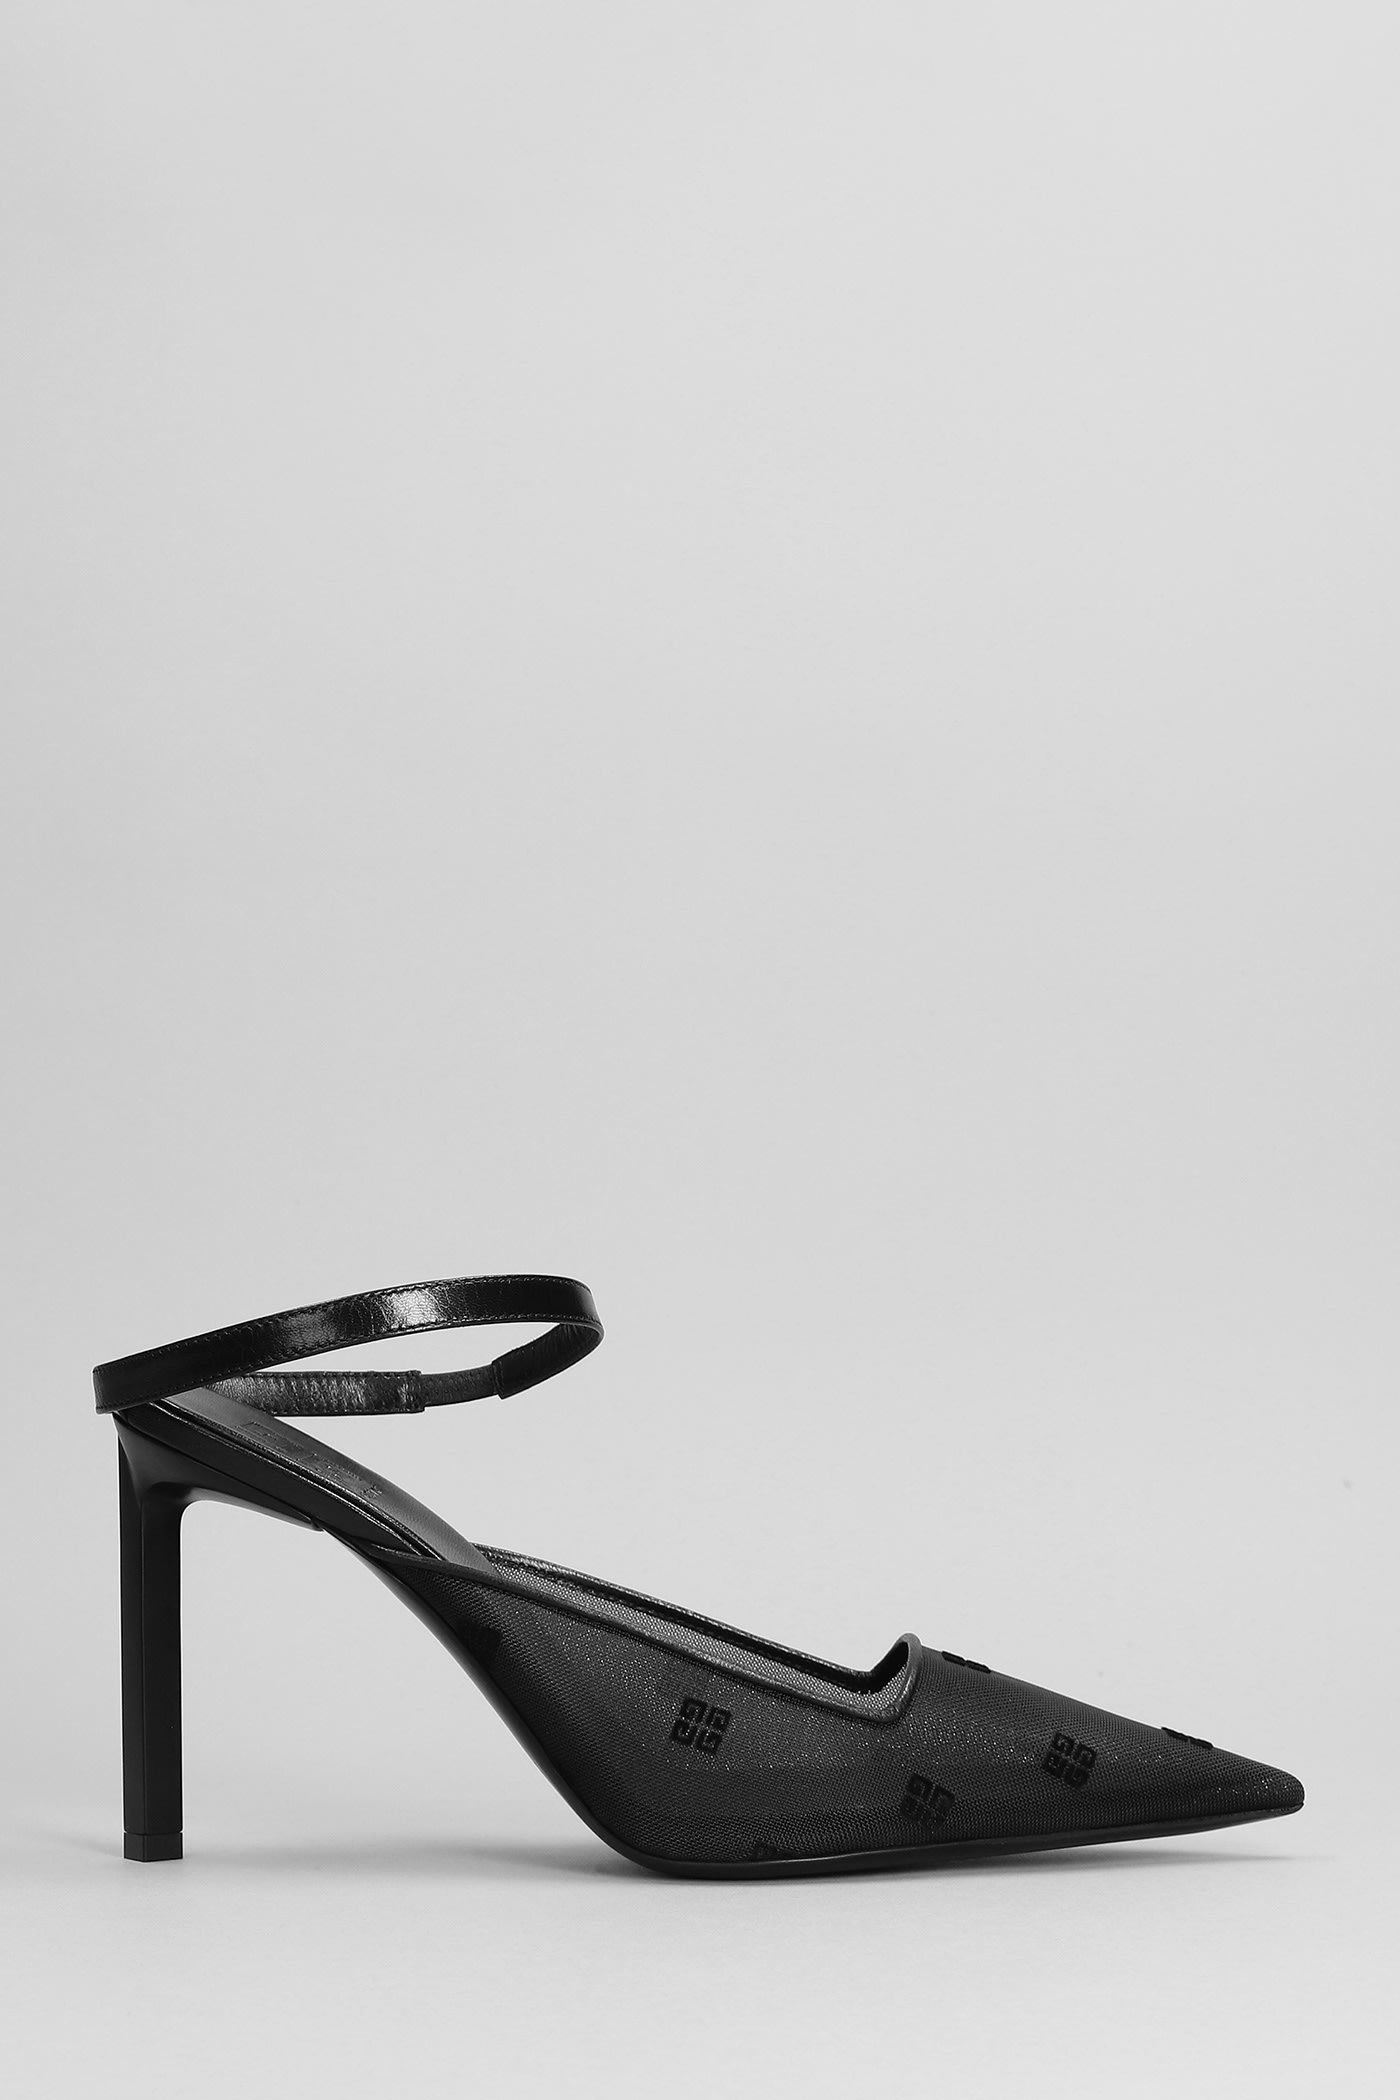 GIVENCHY PUMPS IN BLACK POLYAMIDE